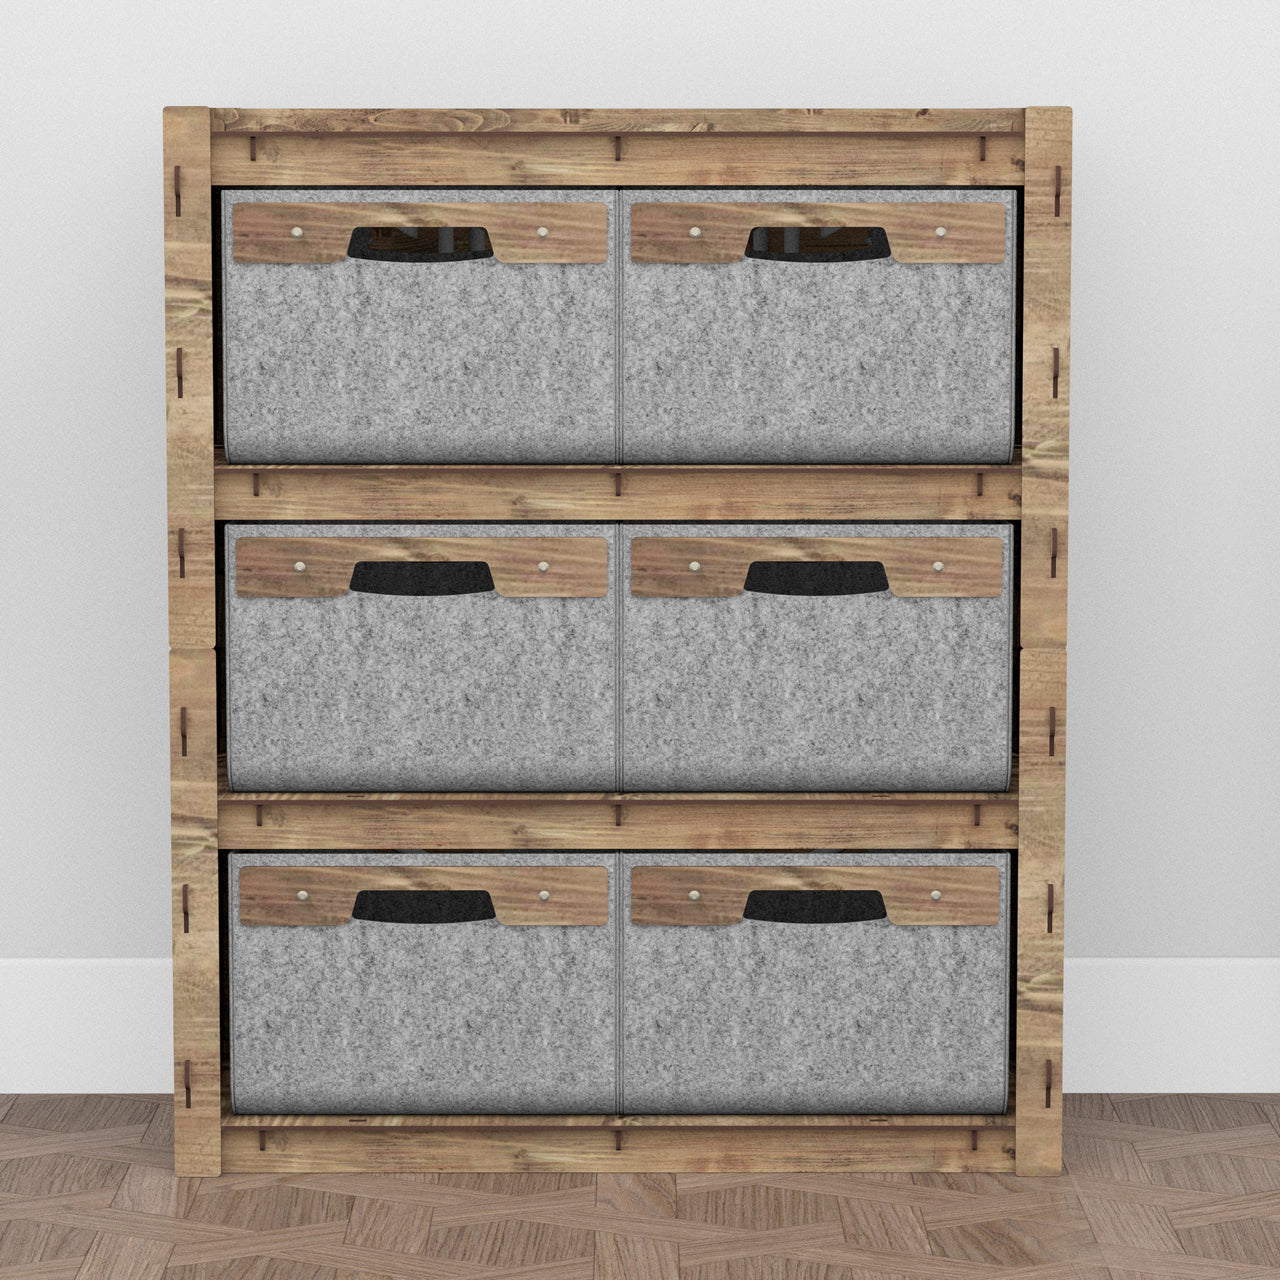 Honeycomb Chest Of 6 Drawers Storage Cabinet [6 SMALL GRAY BINS